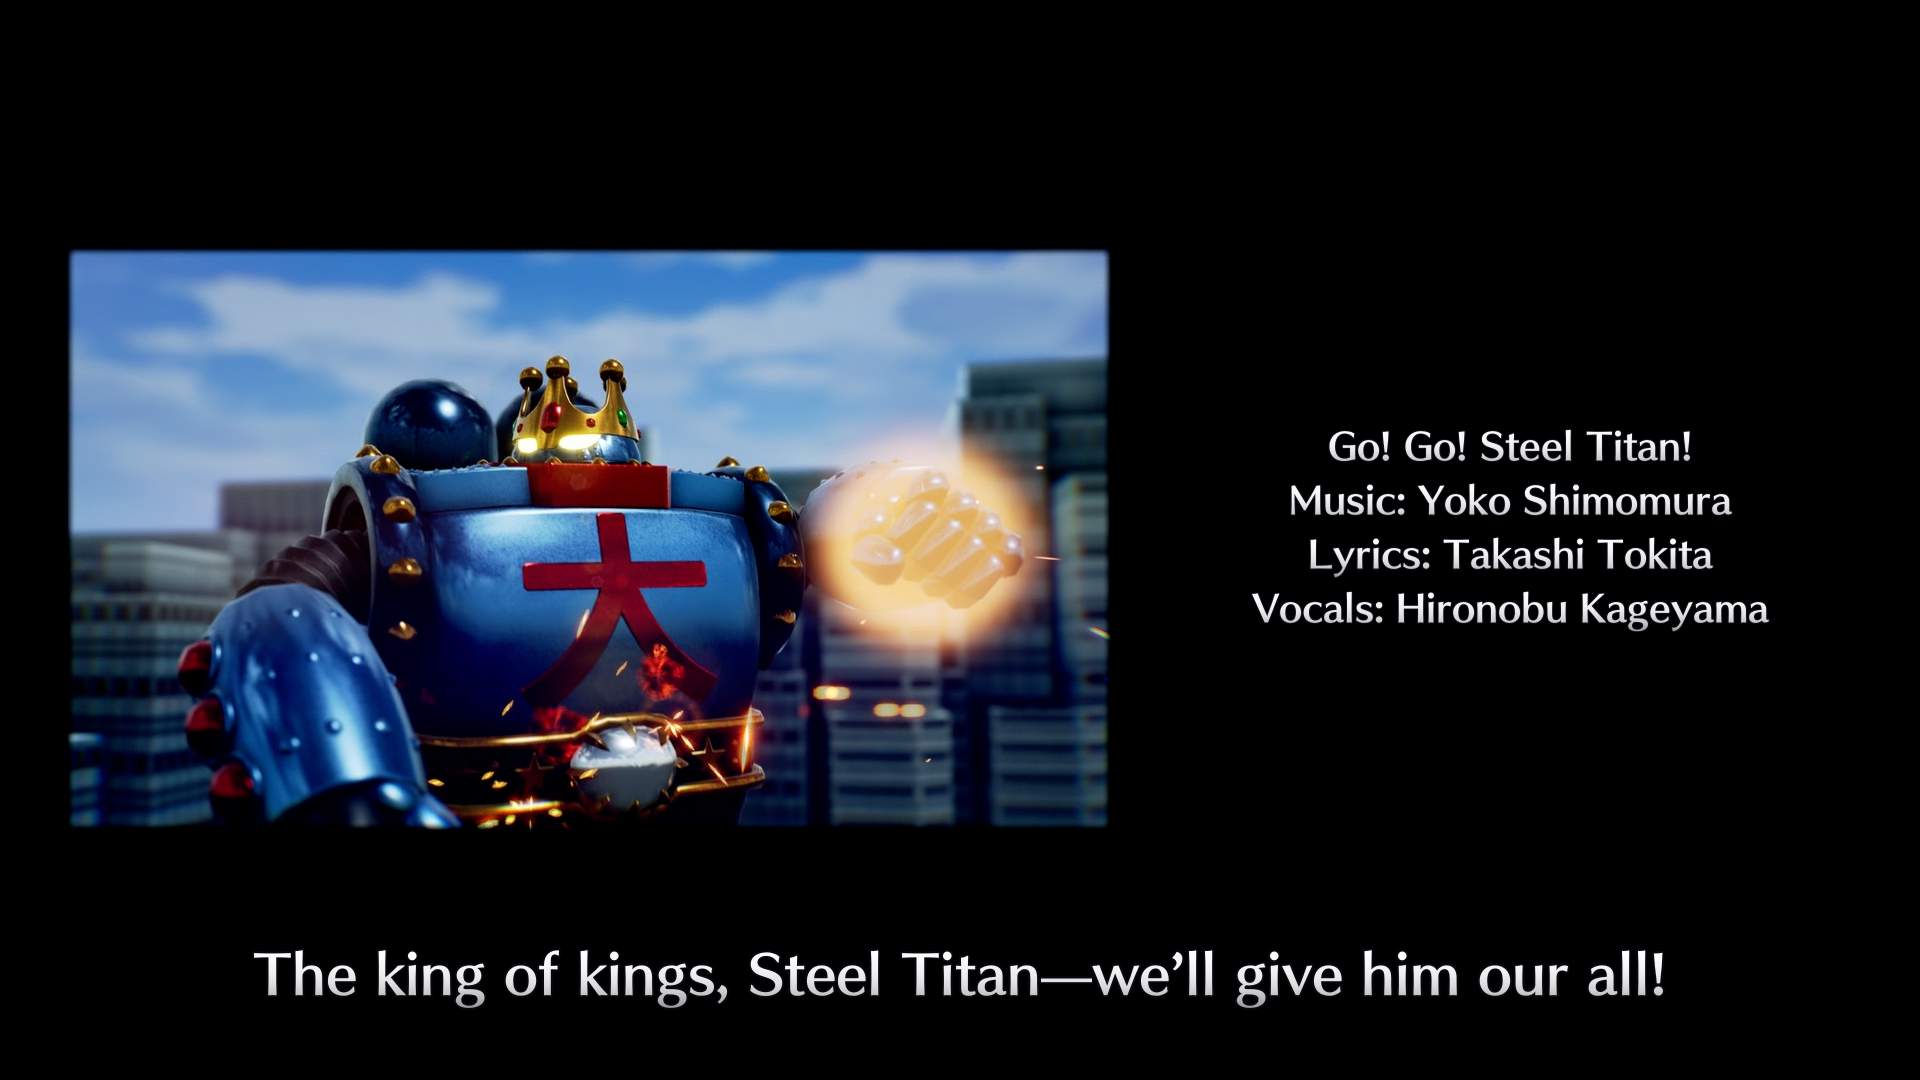 An image of the Steel Titan with a glowing fist, next to some credits.